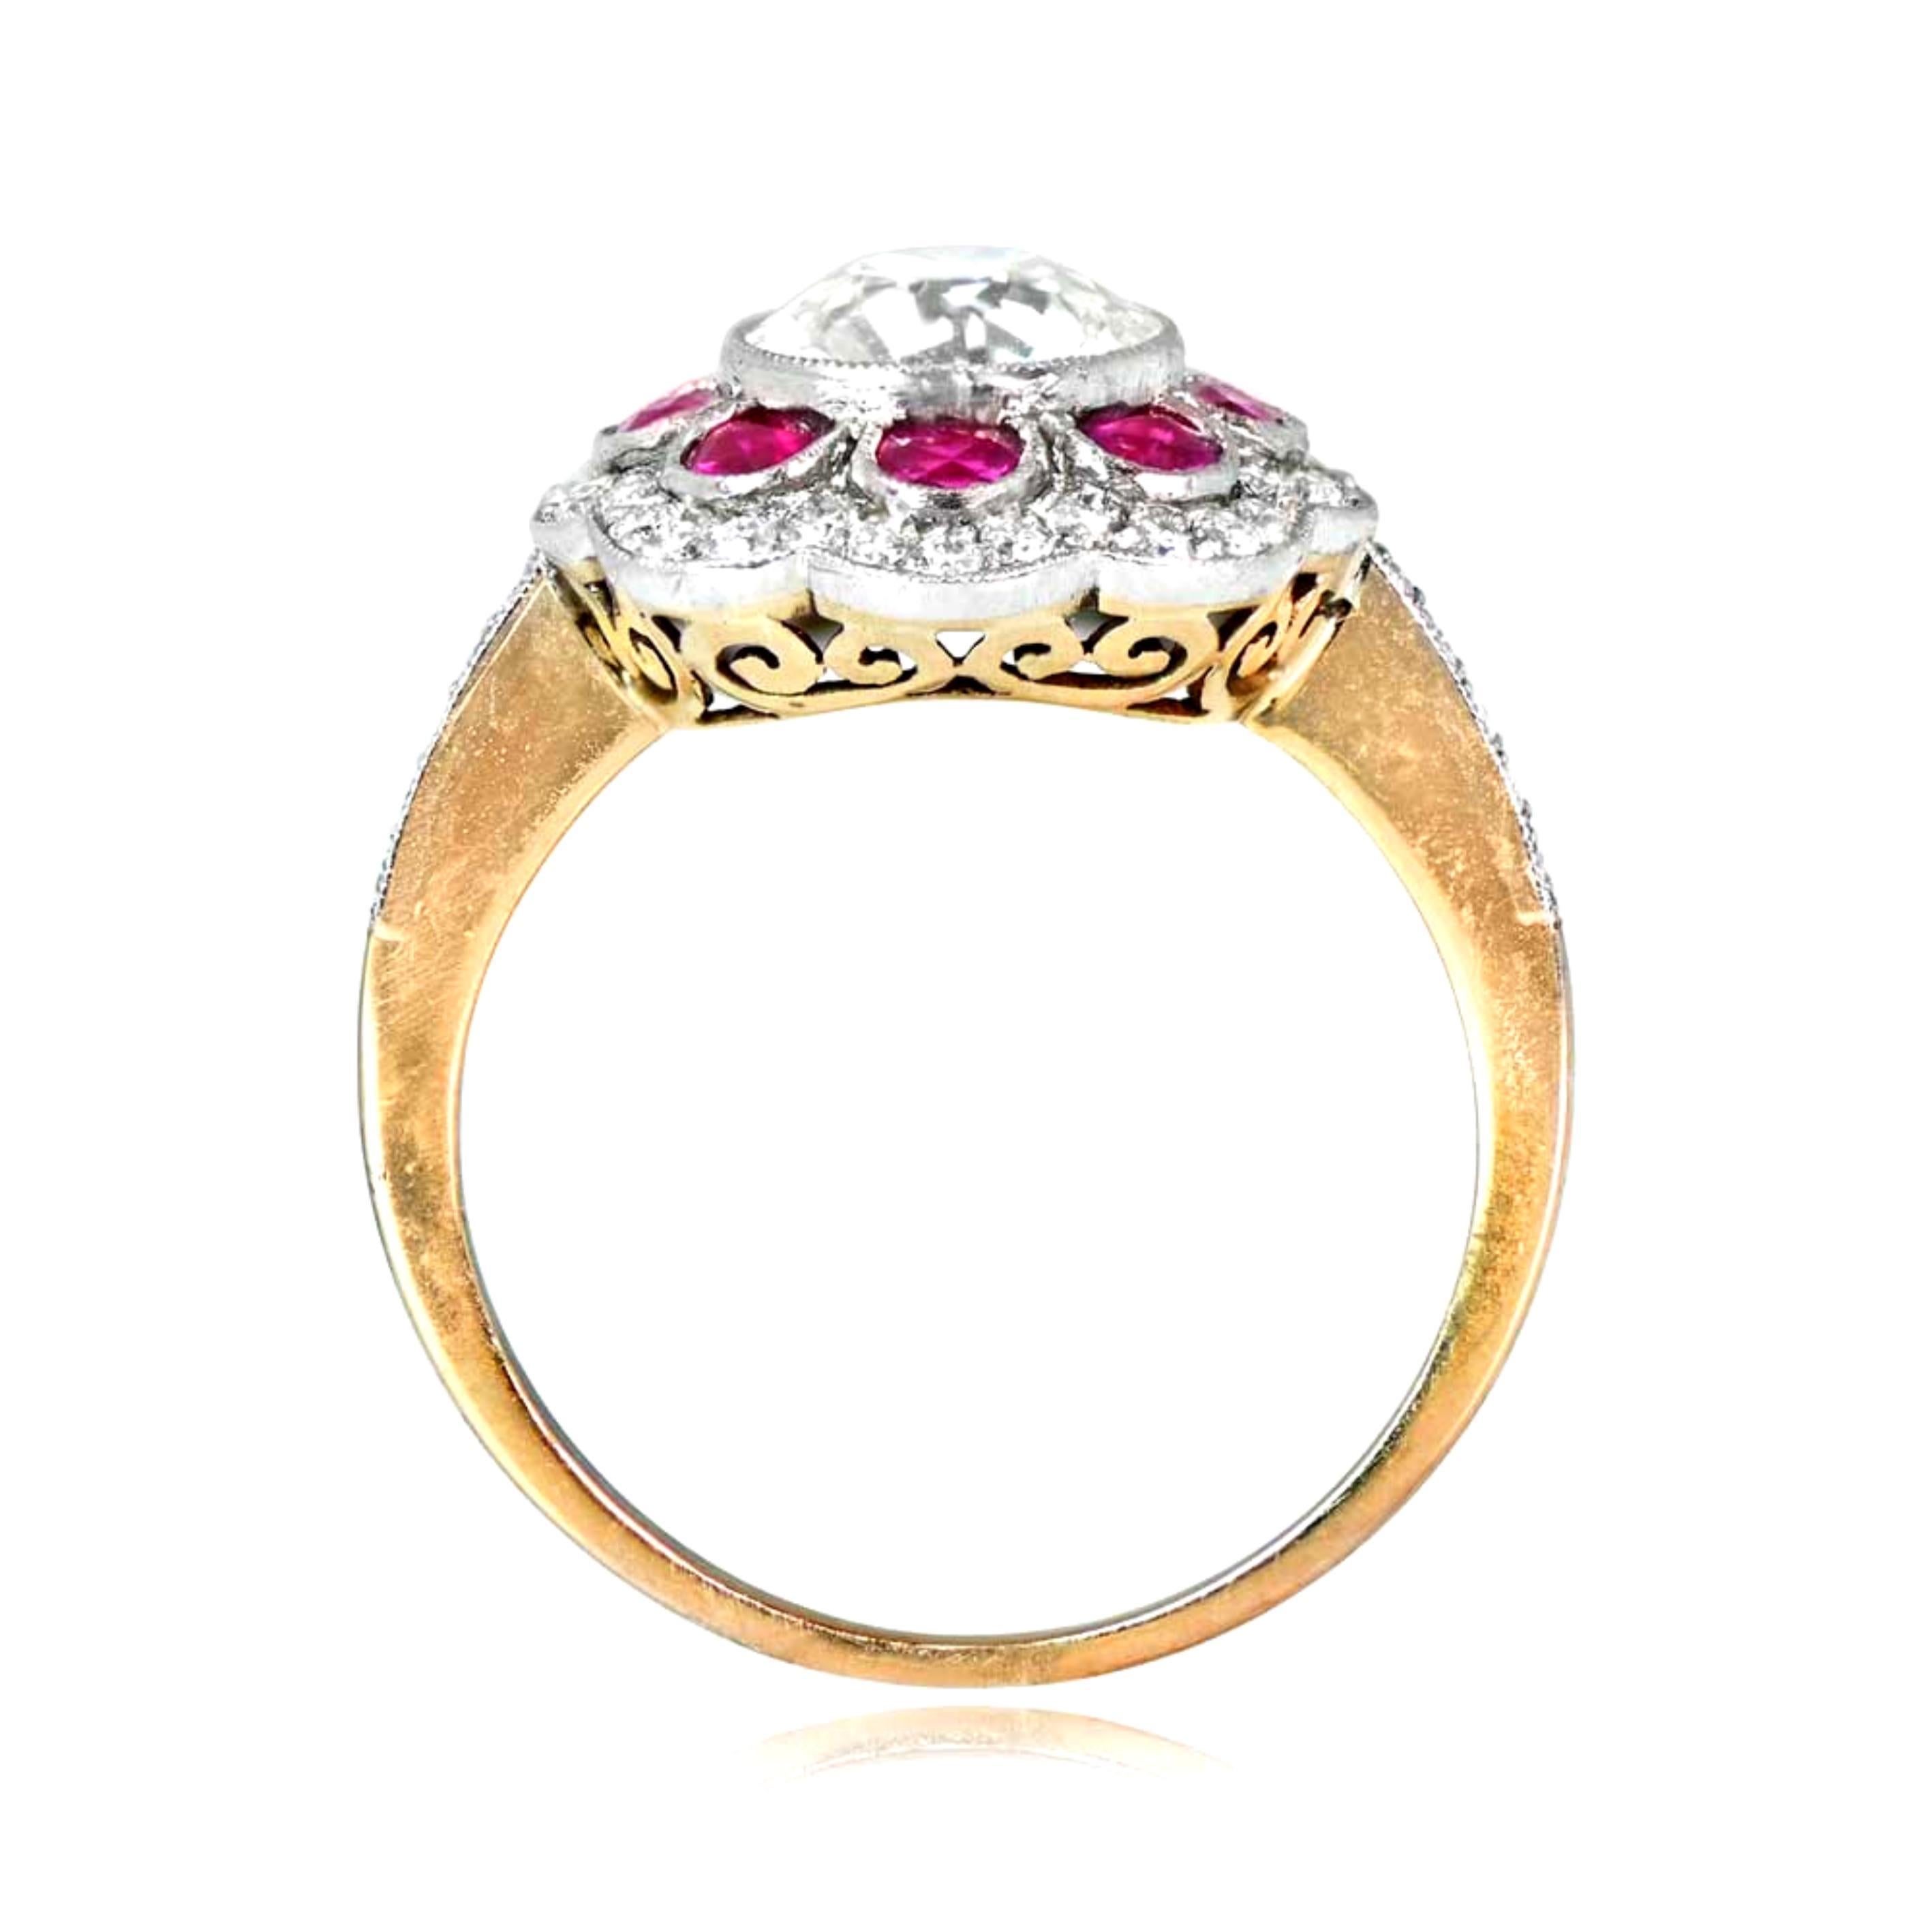 Vintage engagement ring with a 1.47 carat GIA-certified old European-cut diamond, L color and VS1 clarity, bezel set. Half moon-cut natural rubies (0.48 carats total weight) surround the center diamond, followed by a floral halo of old European cut